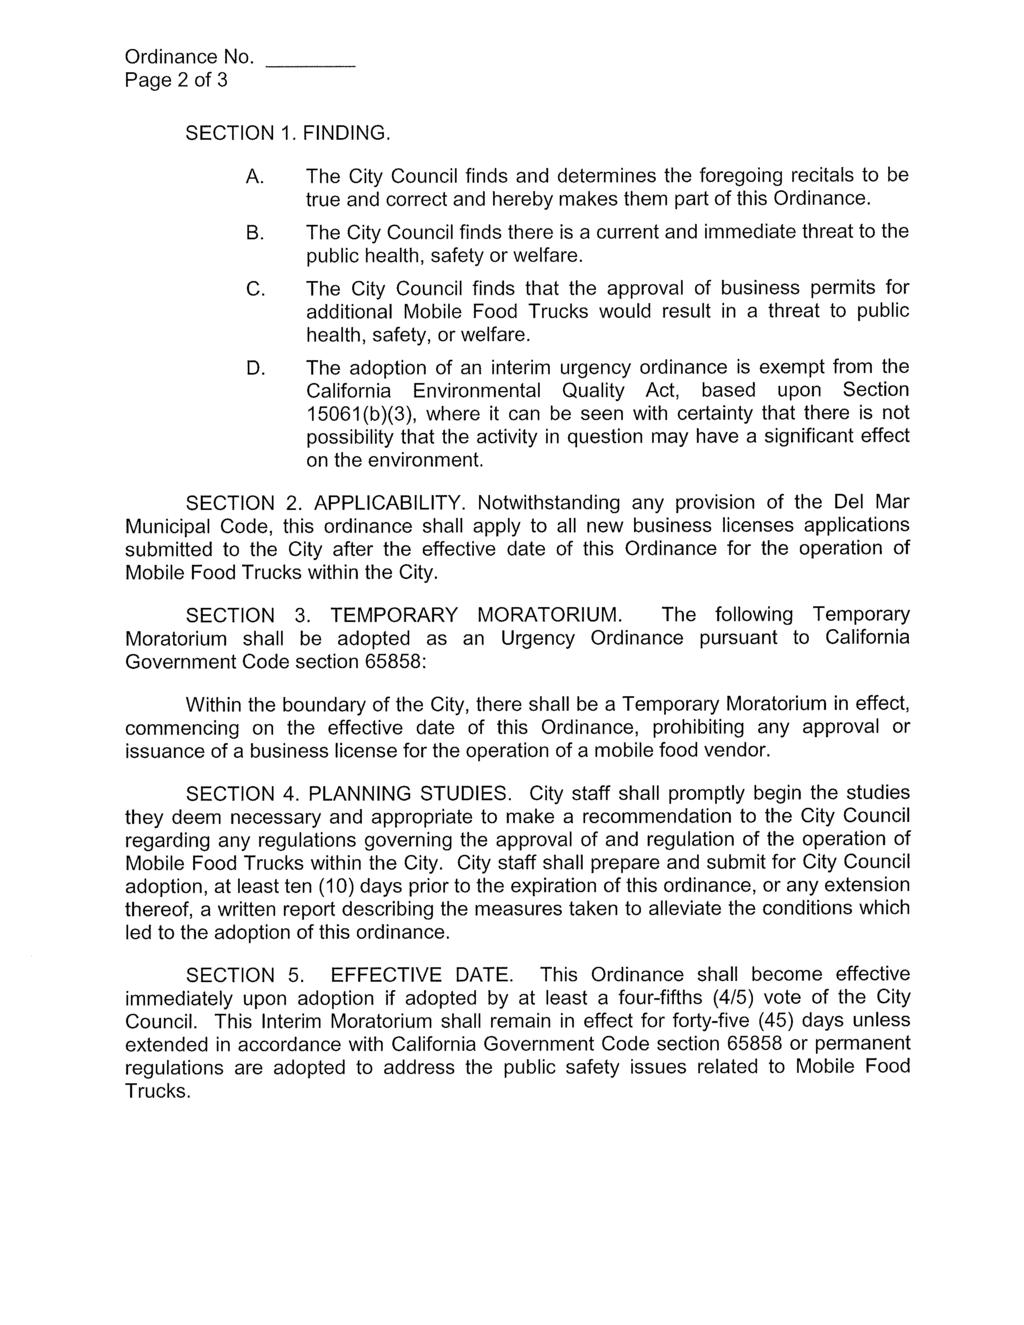 Ordinance No. Page2of3 SECTION 1. FINDING. A. The City Council finds and determines the foregoing recitals to be true and correct and hereby makes them part of this Ordinance. B.